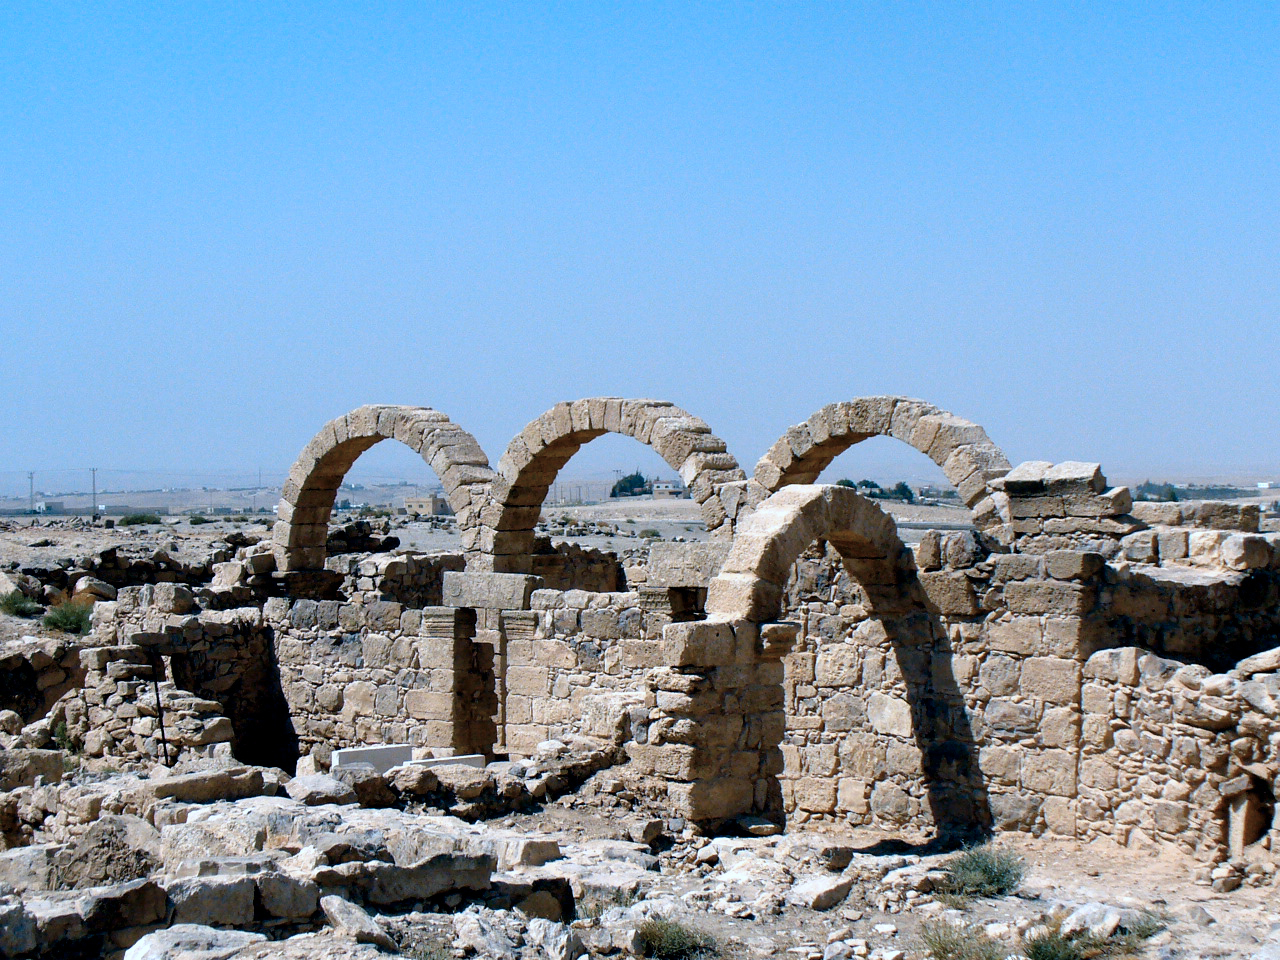 several archways sit on top of rocks in the desert